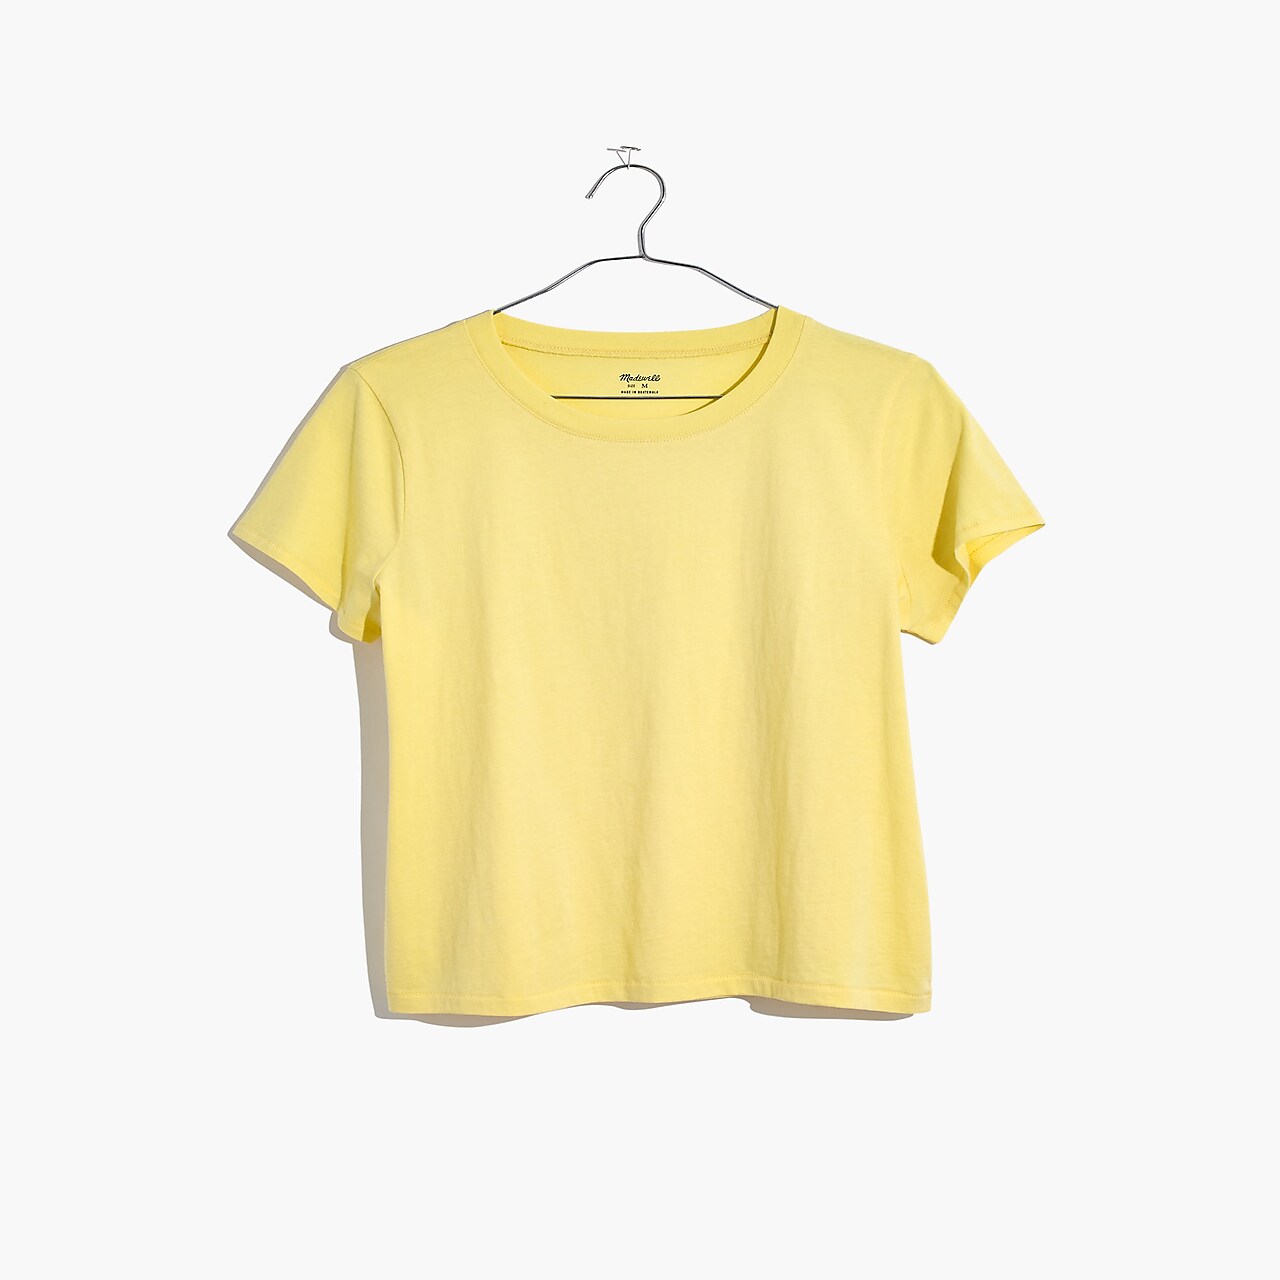 Mw Northside Vintage Tee In Pale Citron